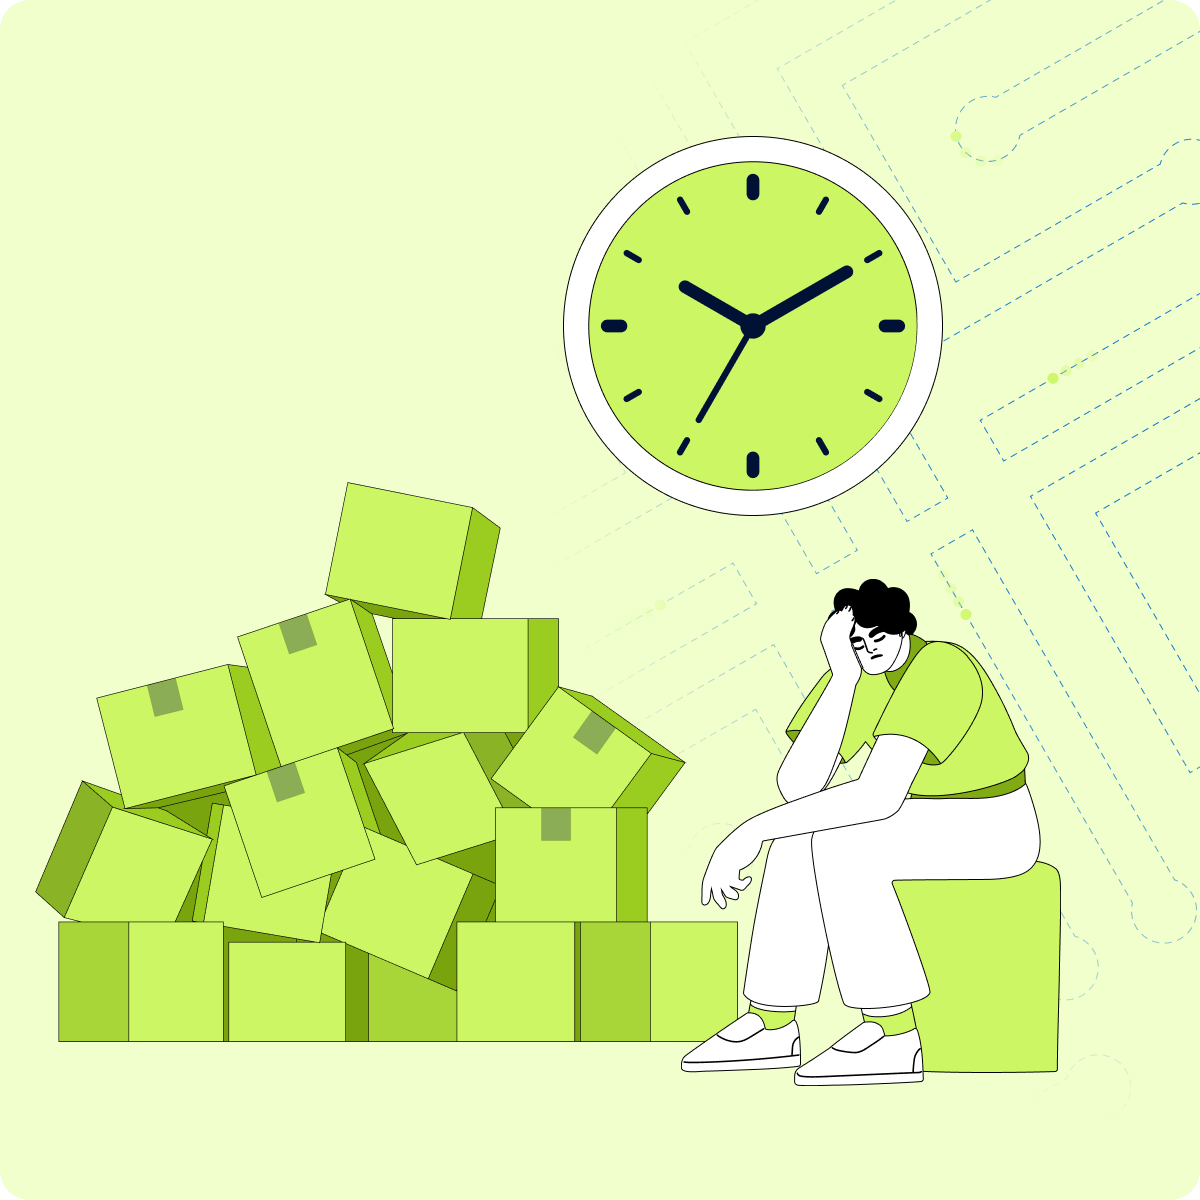 Illustration of worker frustrated because a system is down. They are surrounded by boxes piling up and a clock, showing the importance of needing to reduce downtime.